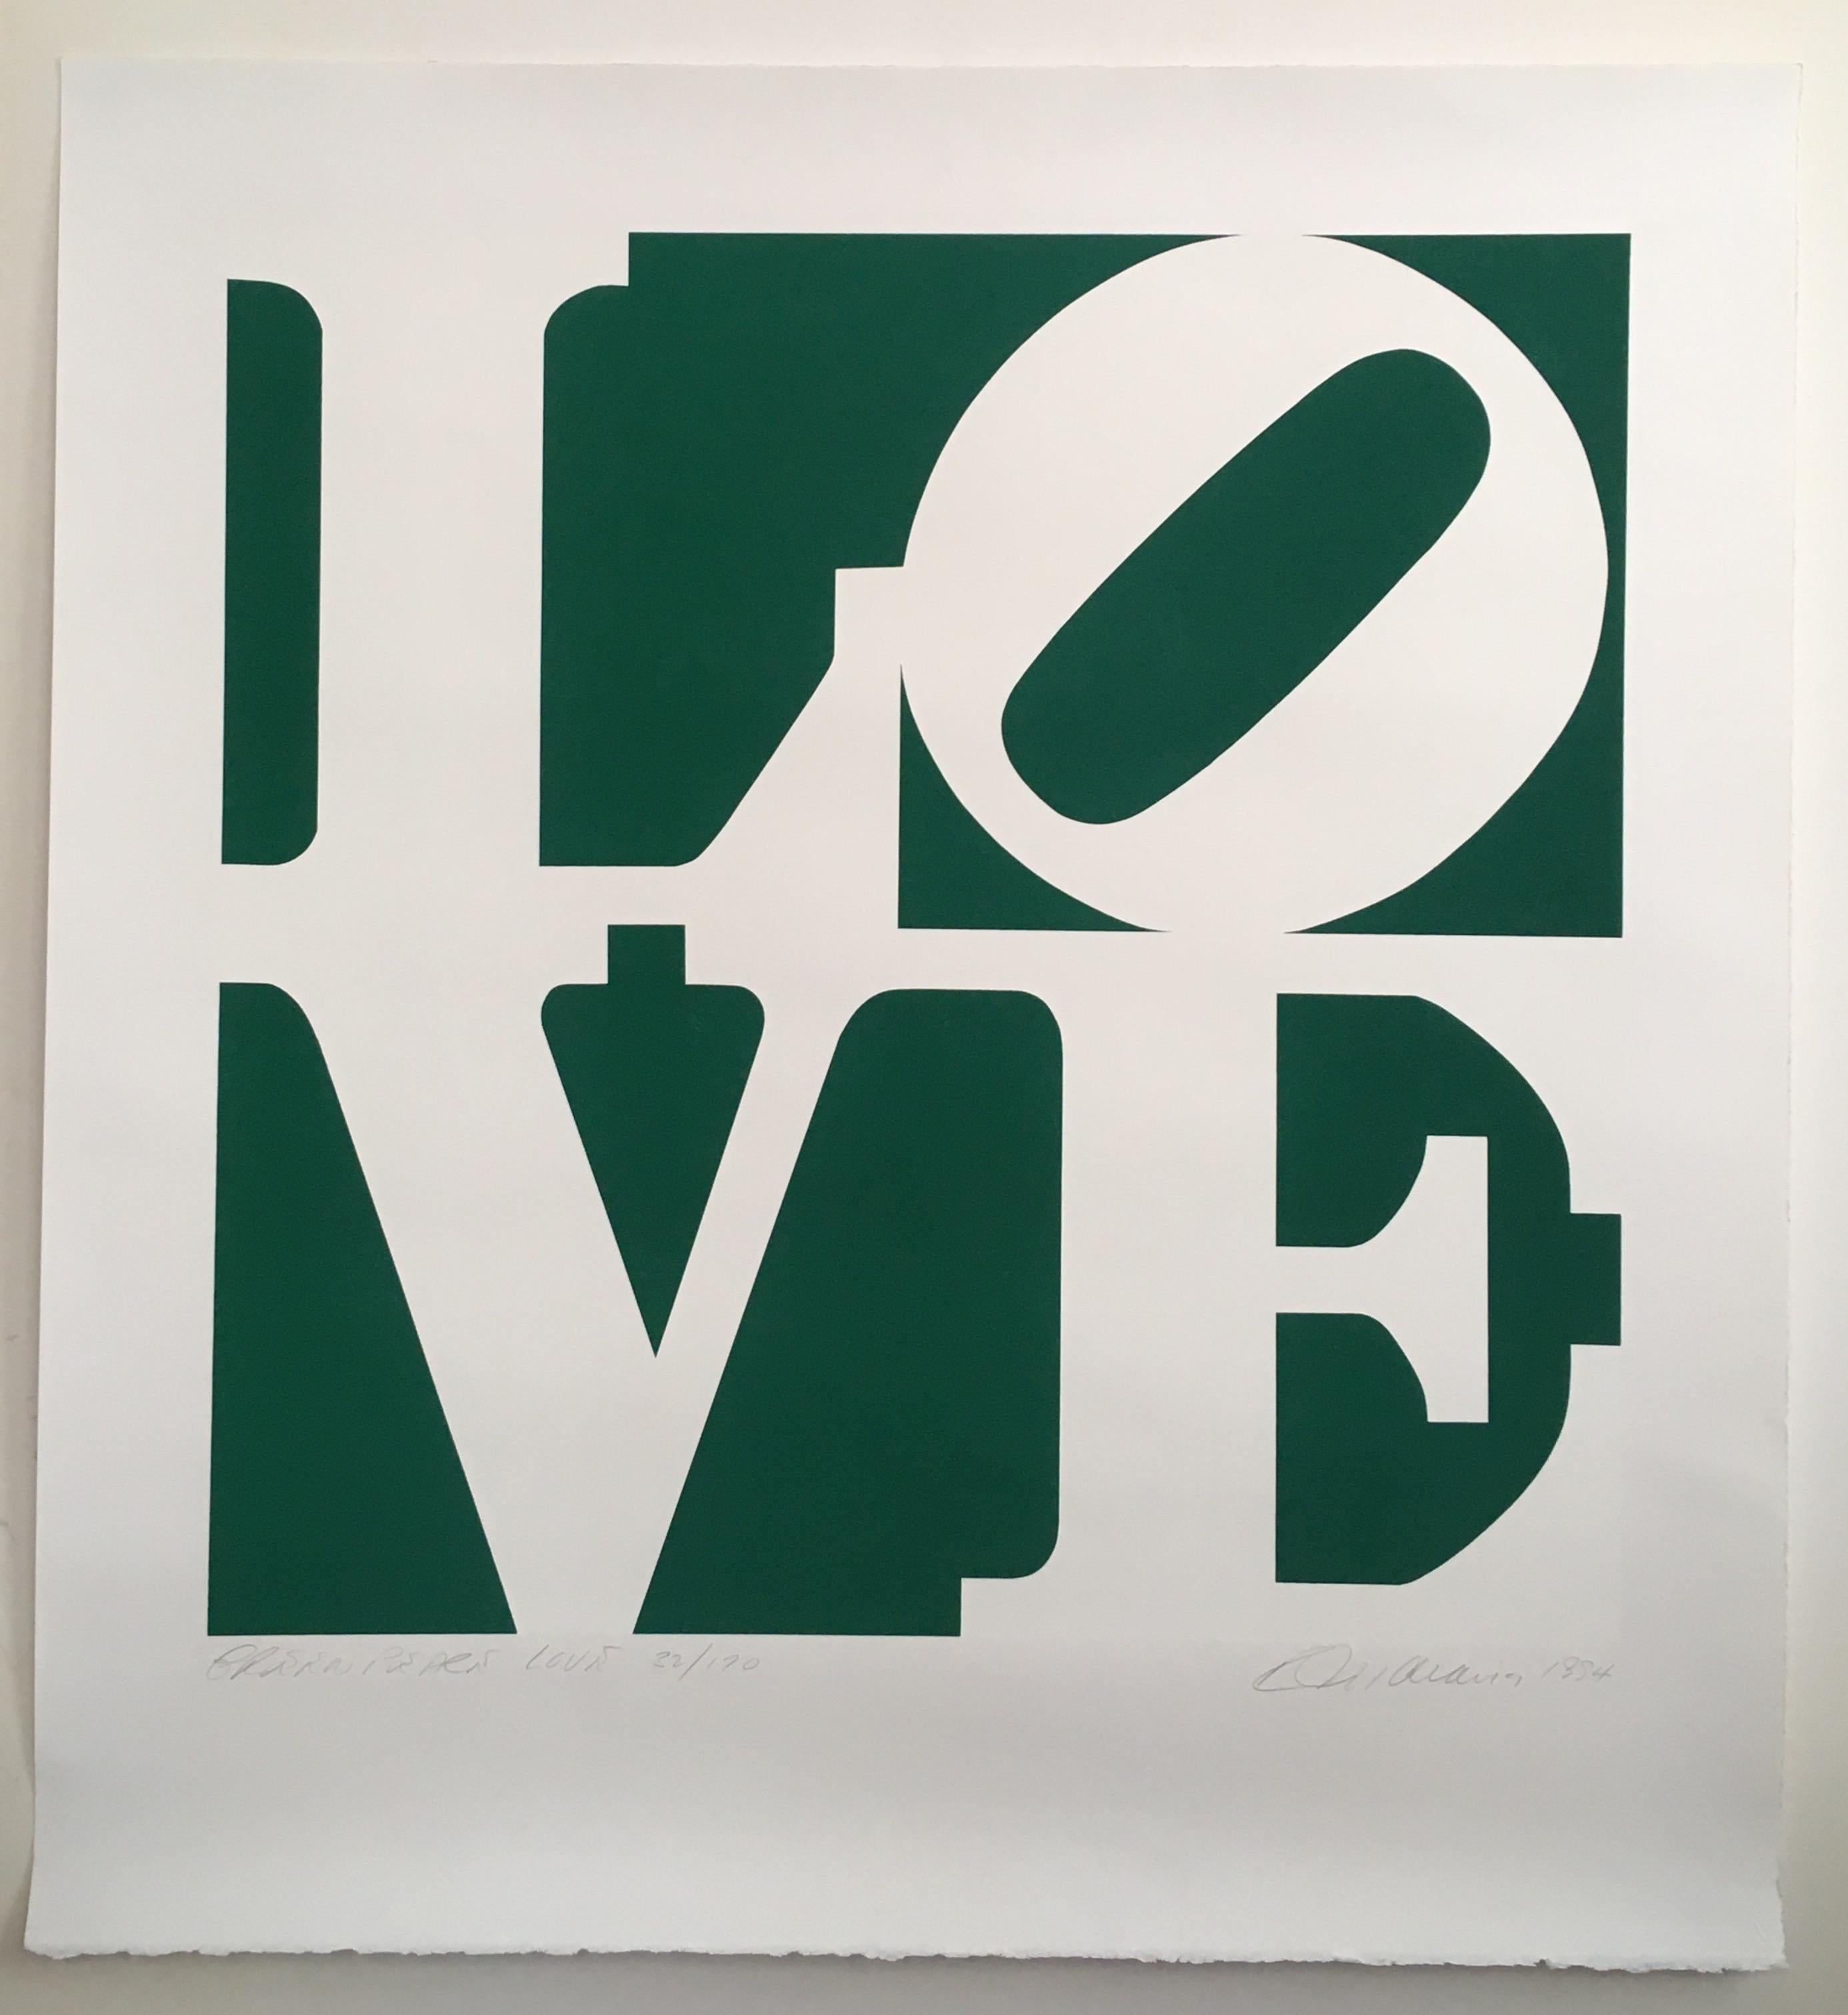 Robert Indiana (1928-2018) Greenpeace Love
Screenprint in green and white inks on Rives BFK paper with full margins
Signed and numbered in pencil 32/170
This particular incarnation of Indiana’s iconic Love was made to benefit and was published by